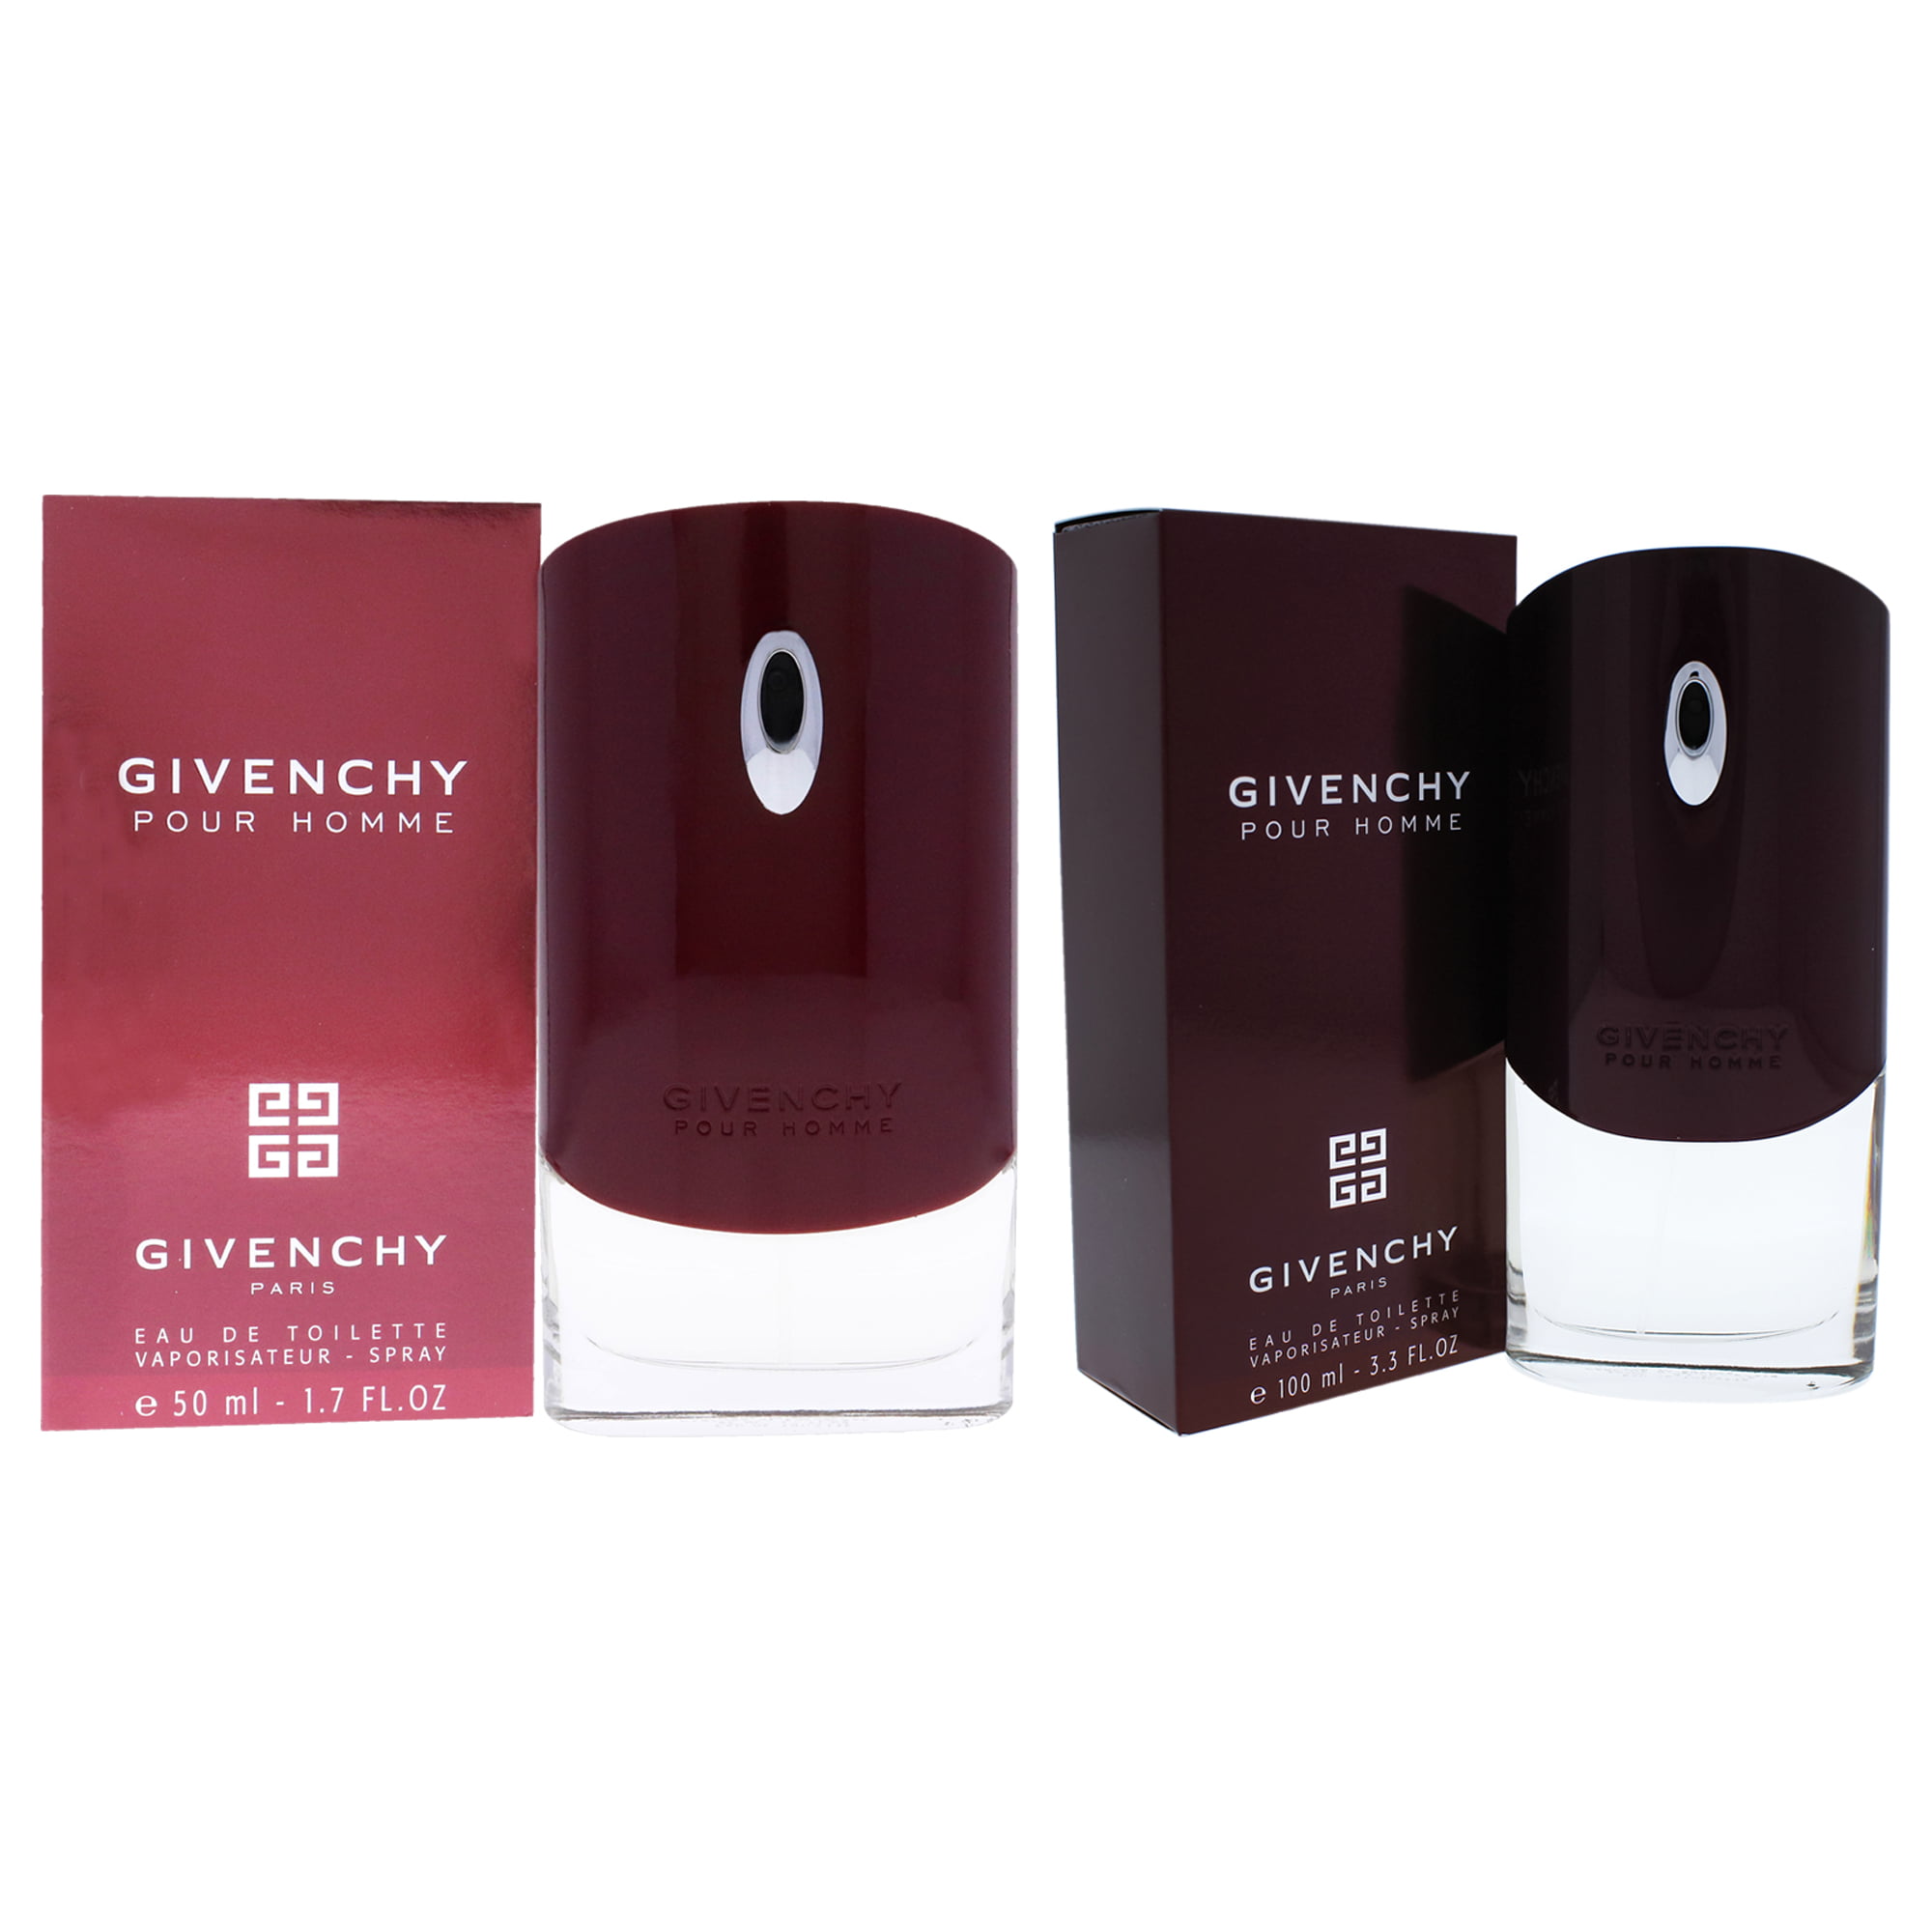 Givenchy pour homme коробка. Givenchy pour homme Blue Label. Реплика Givenchy pour homme. Живанши Пьюр хоум. Givenchy pour homme 100